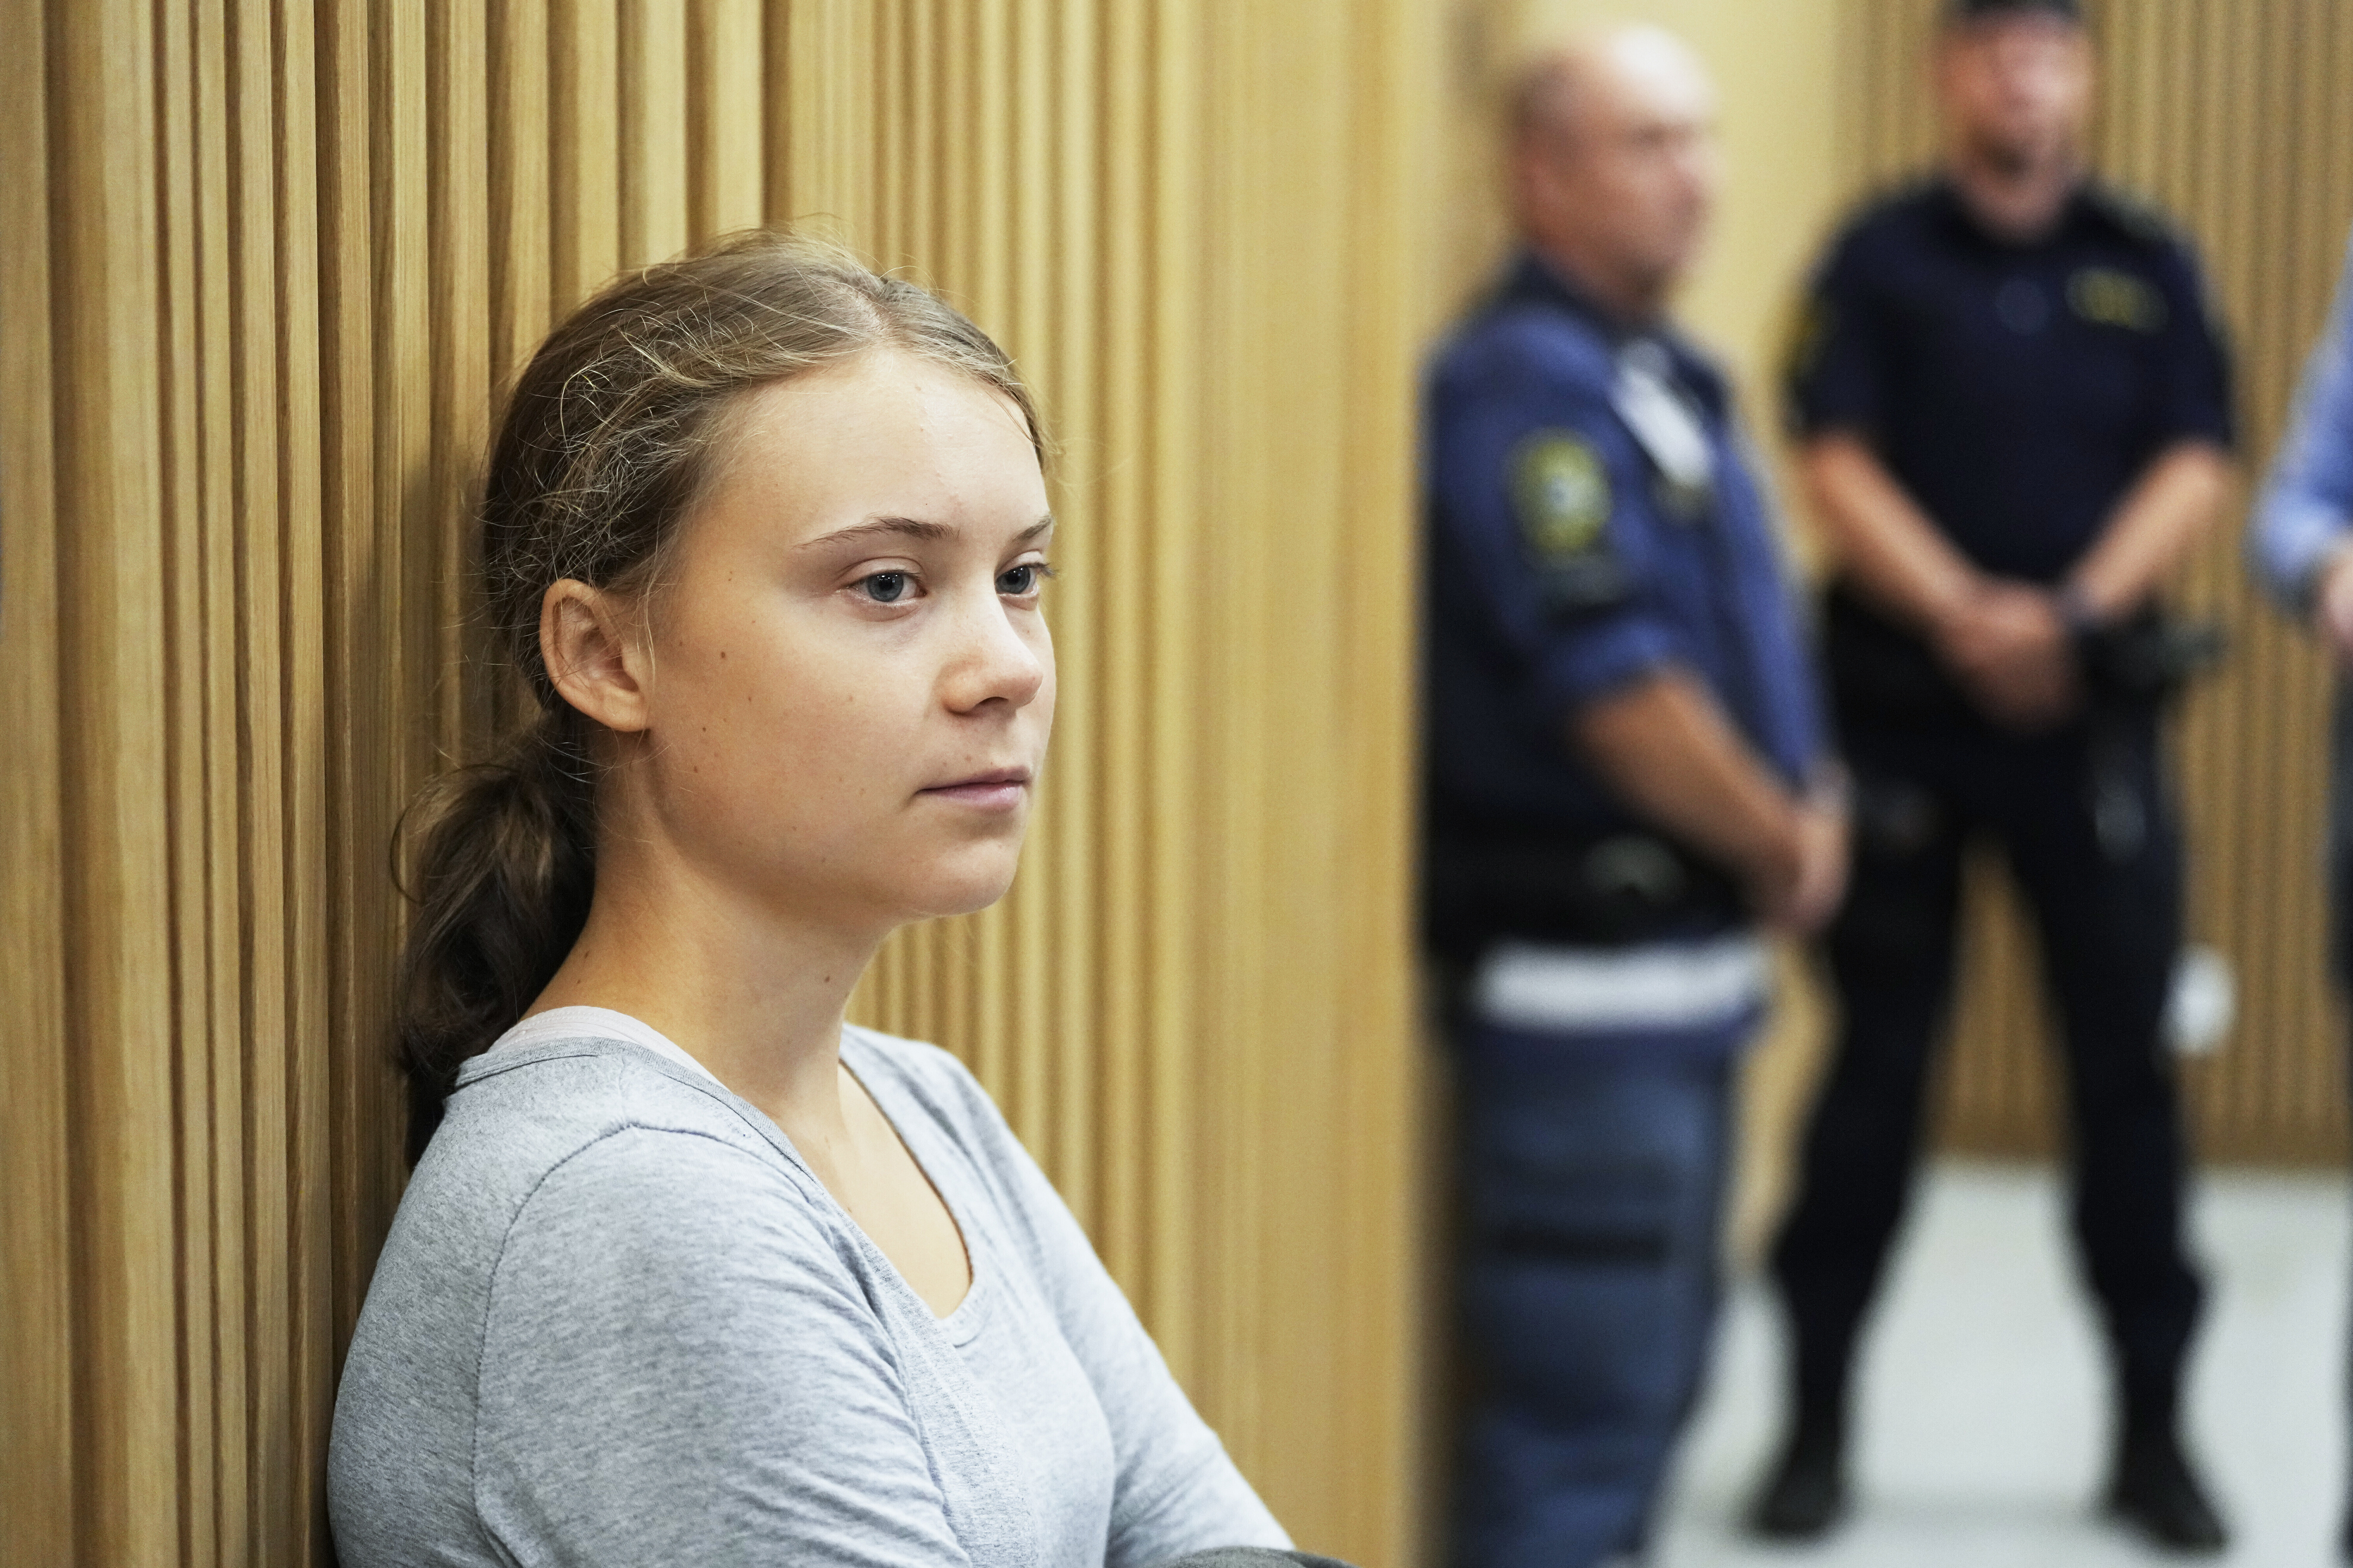 Greta Thunberg Defiant After Swedish Court Fines Her For Disobeying Police During Protest HuffPost Latest News image